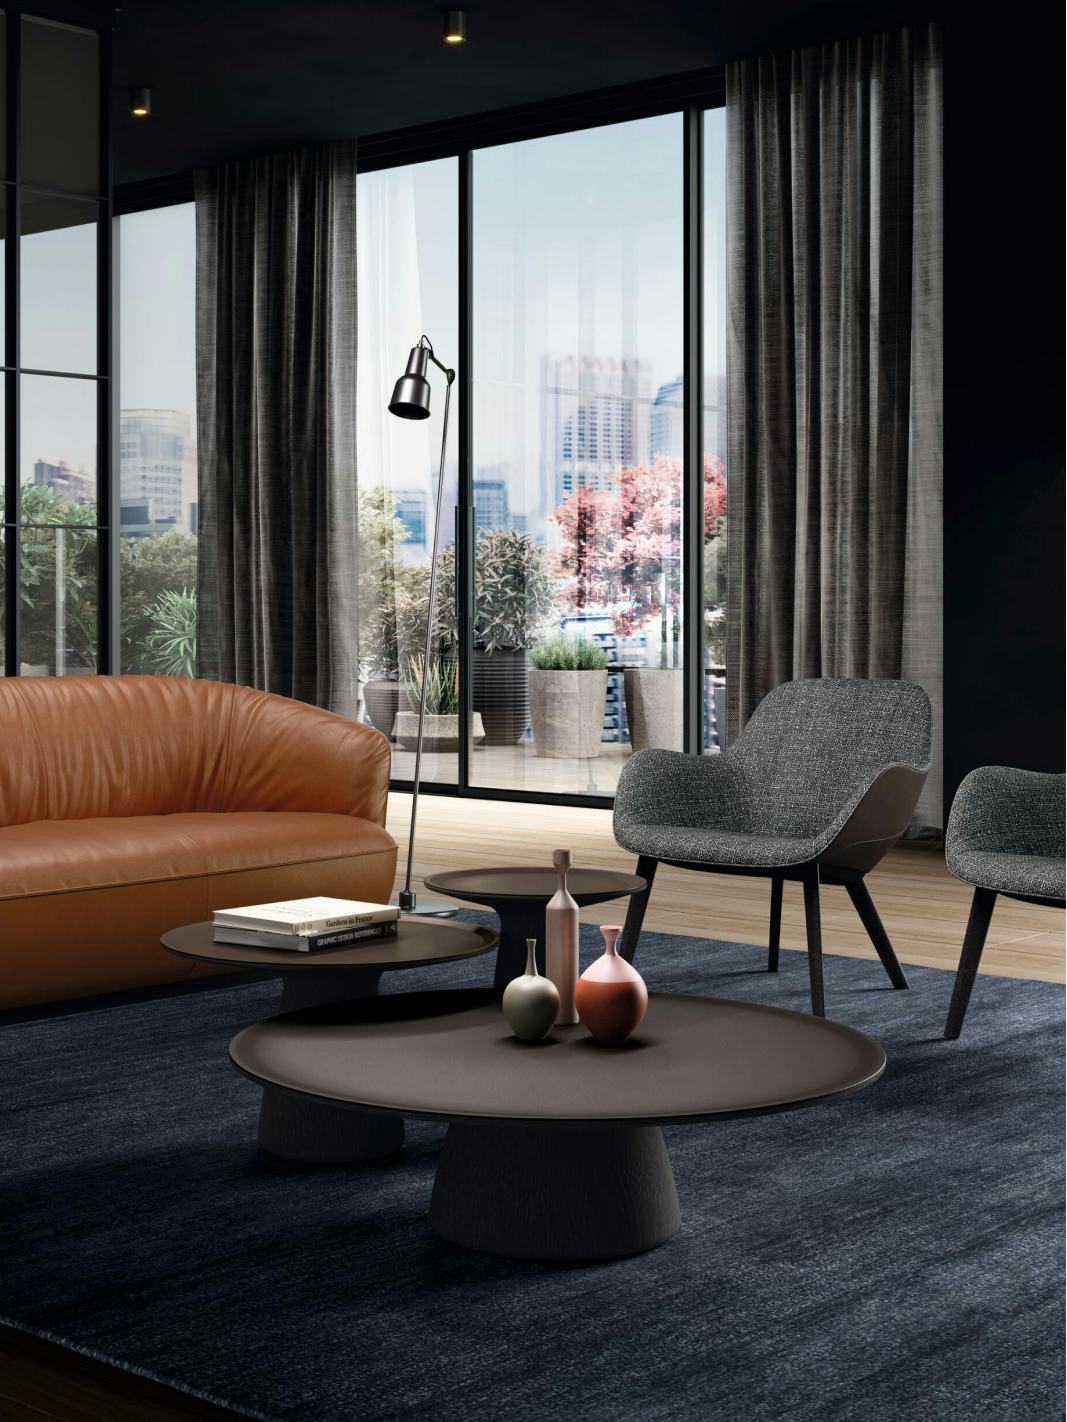 Walter Knoll - Timeless comfort for your home